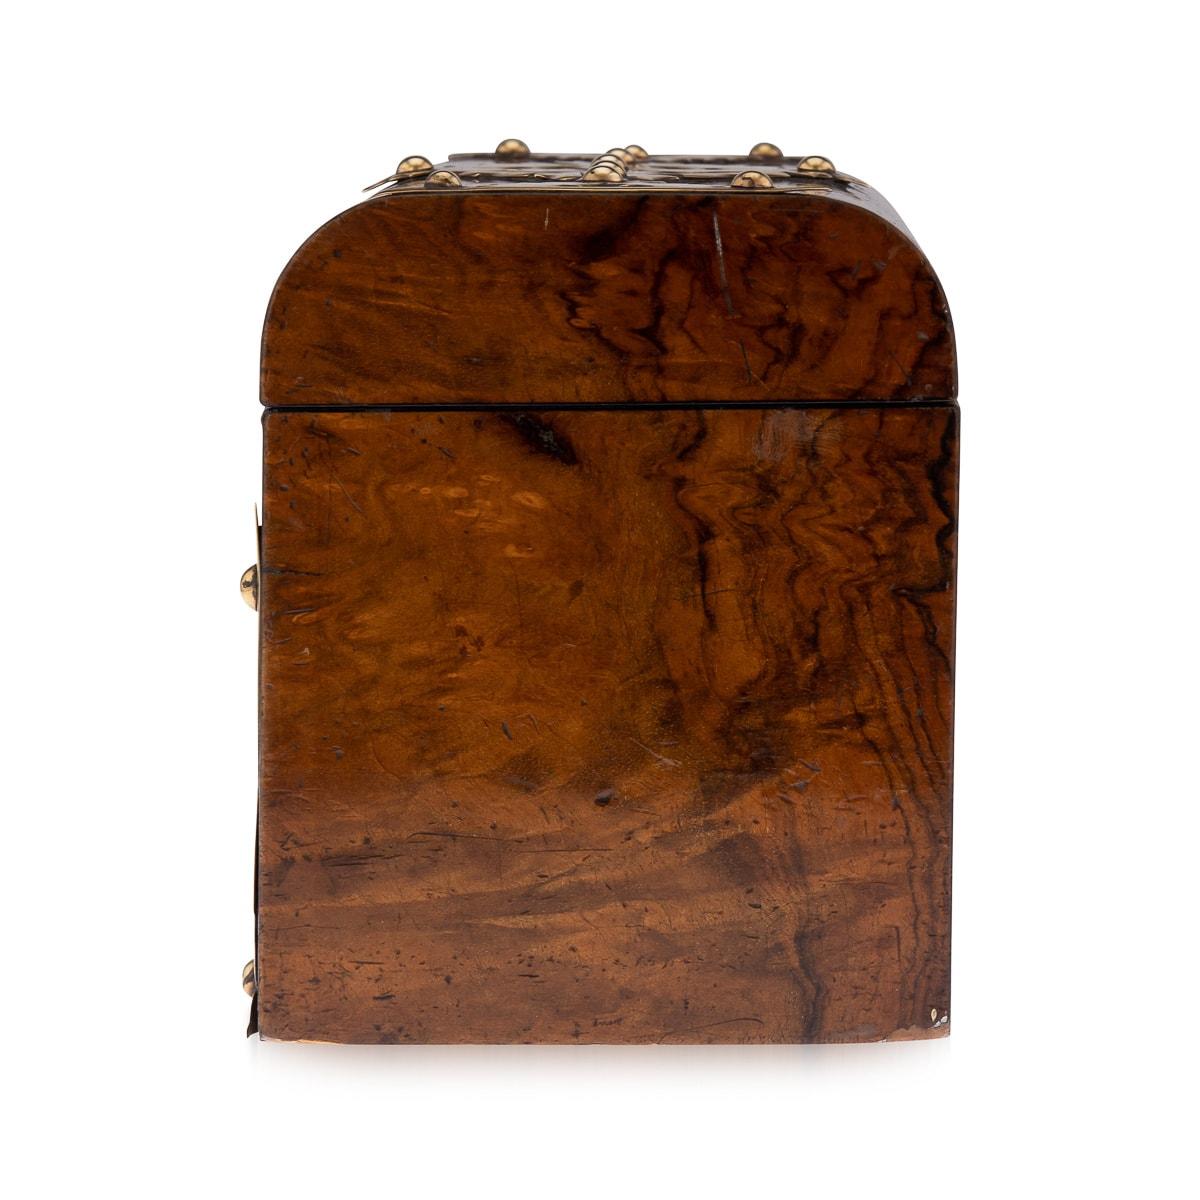 A superb antique Victorian burr walnut casket or trinket box with elaborate decorative pierced cut brass mounts, circa 1860 in date. The lid opens to reveal a paper lined interior ready to store trinkets or jewellery of any kind. An extremely